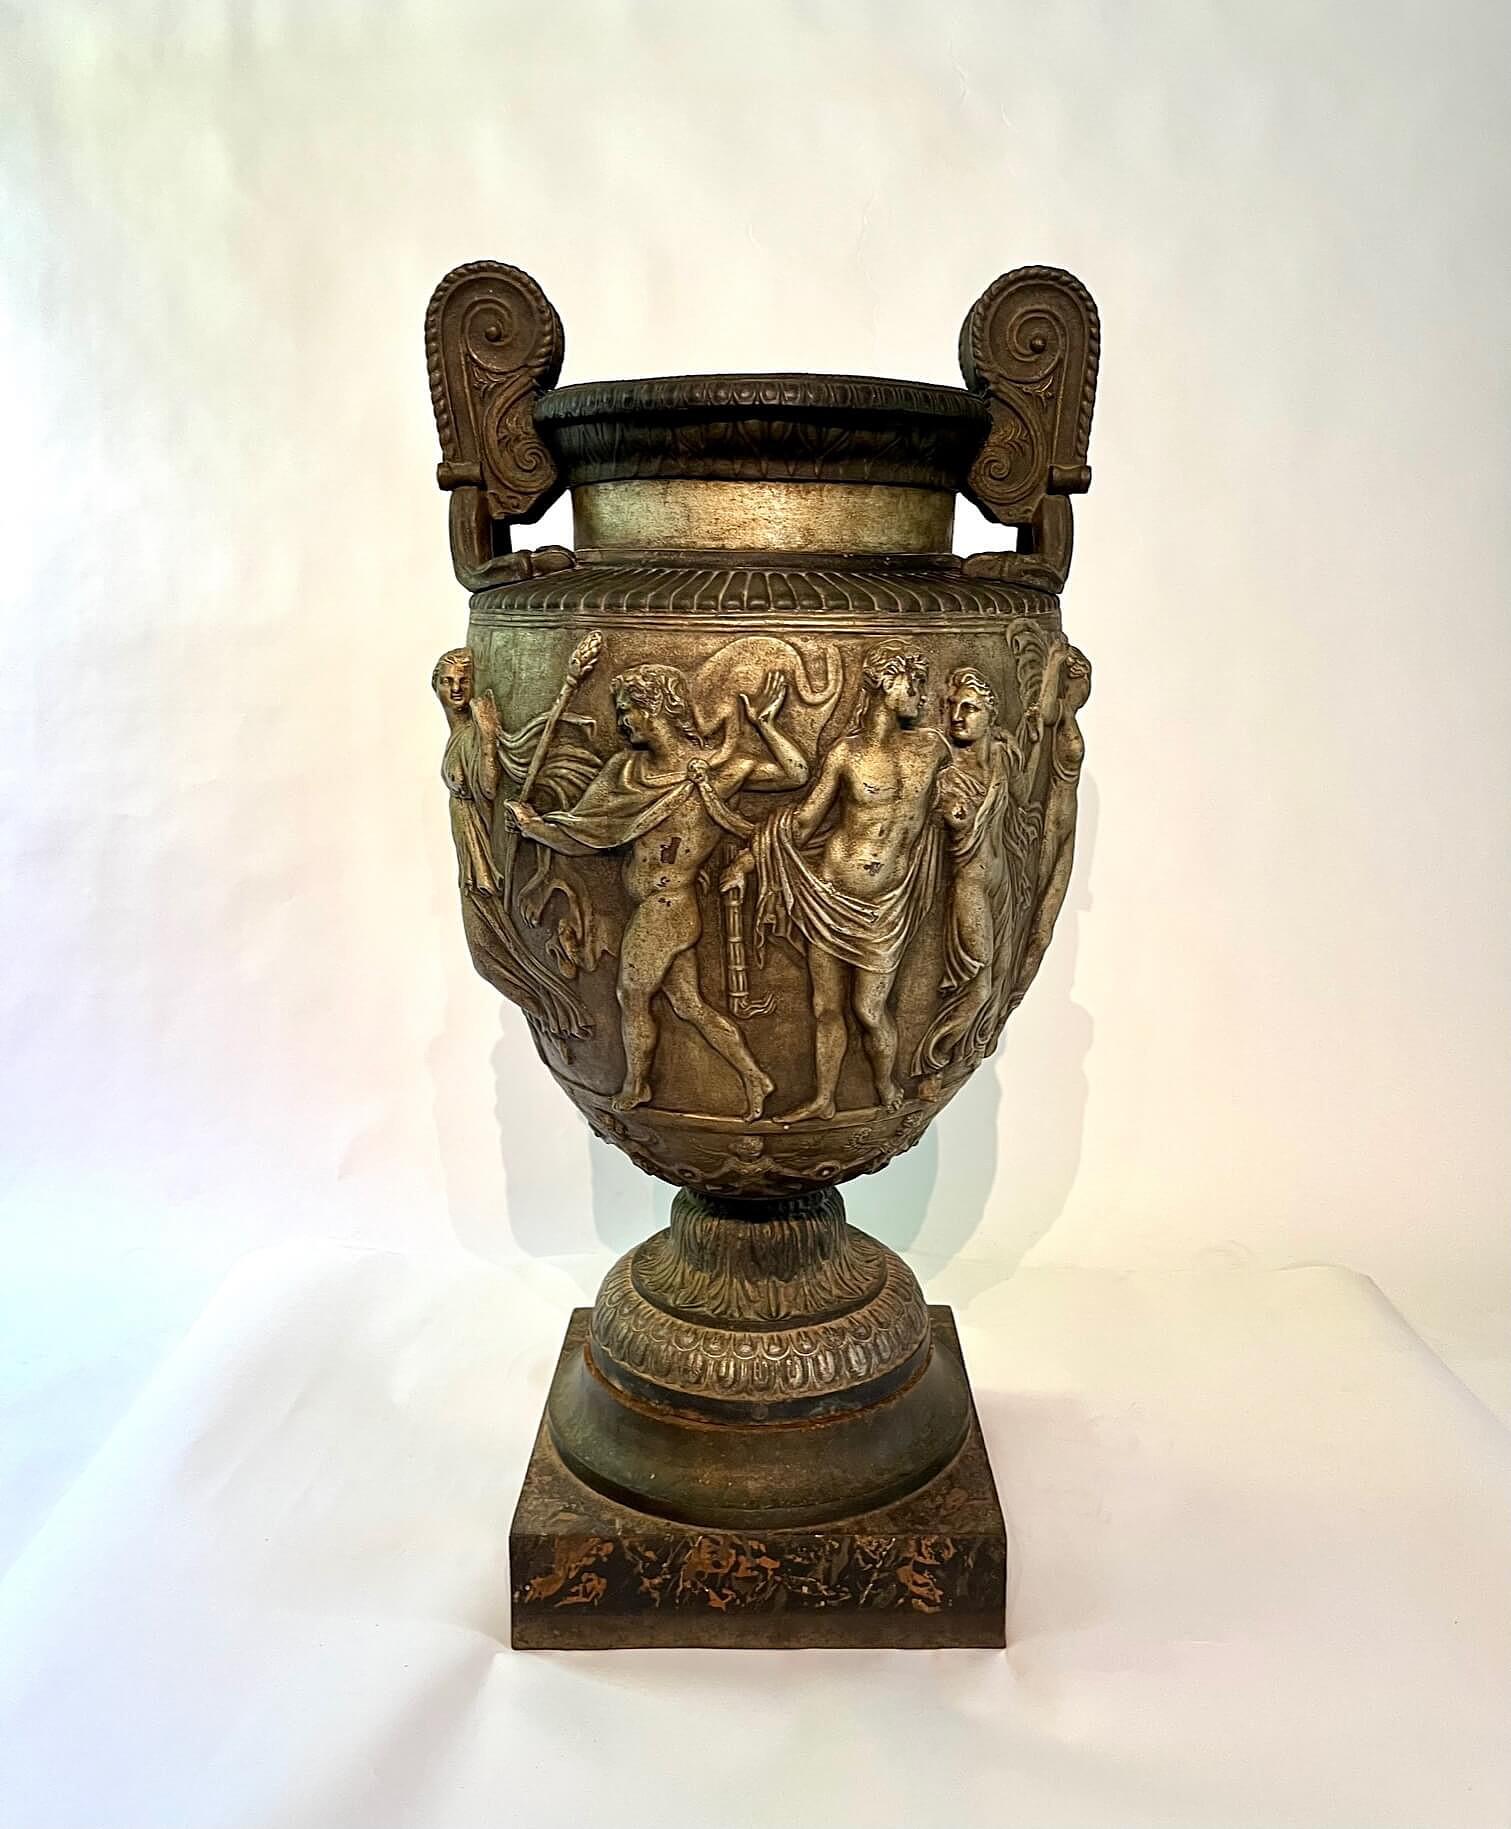 Rare and spectacular circa 1870 cast iron actual scale model of the Townley Vase by French foundry Val d'Osne, having original black and silver paint scheme on faux-marbre painted plinth, the volute-krater form vase decorated in high-relief with a